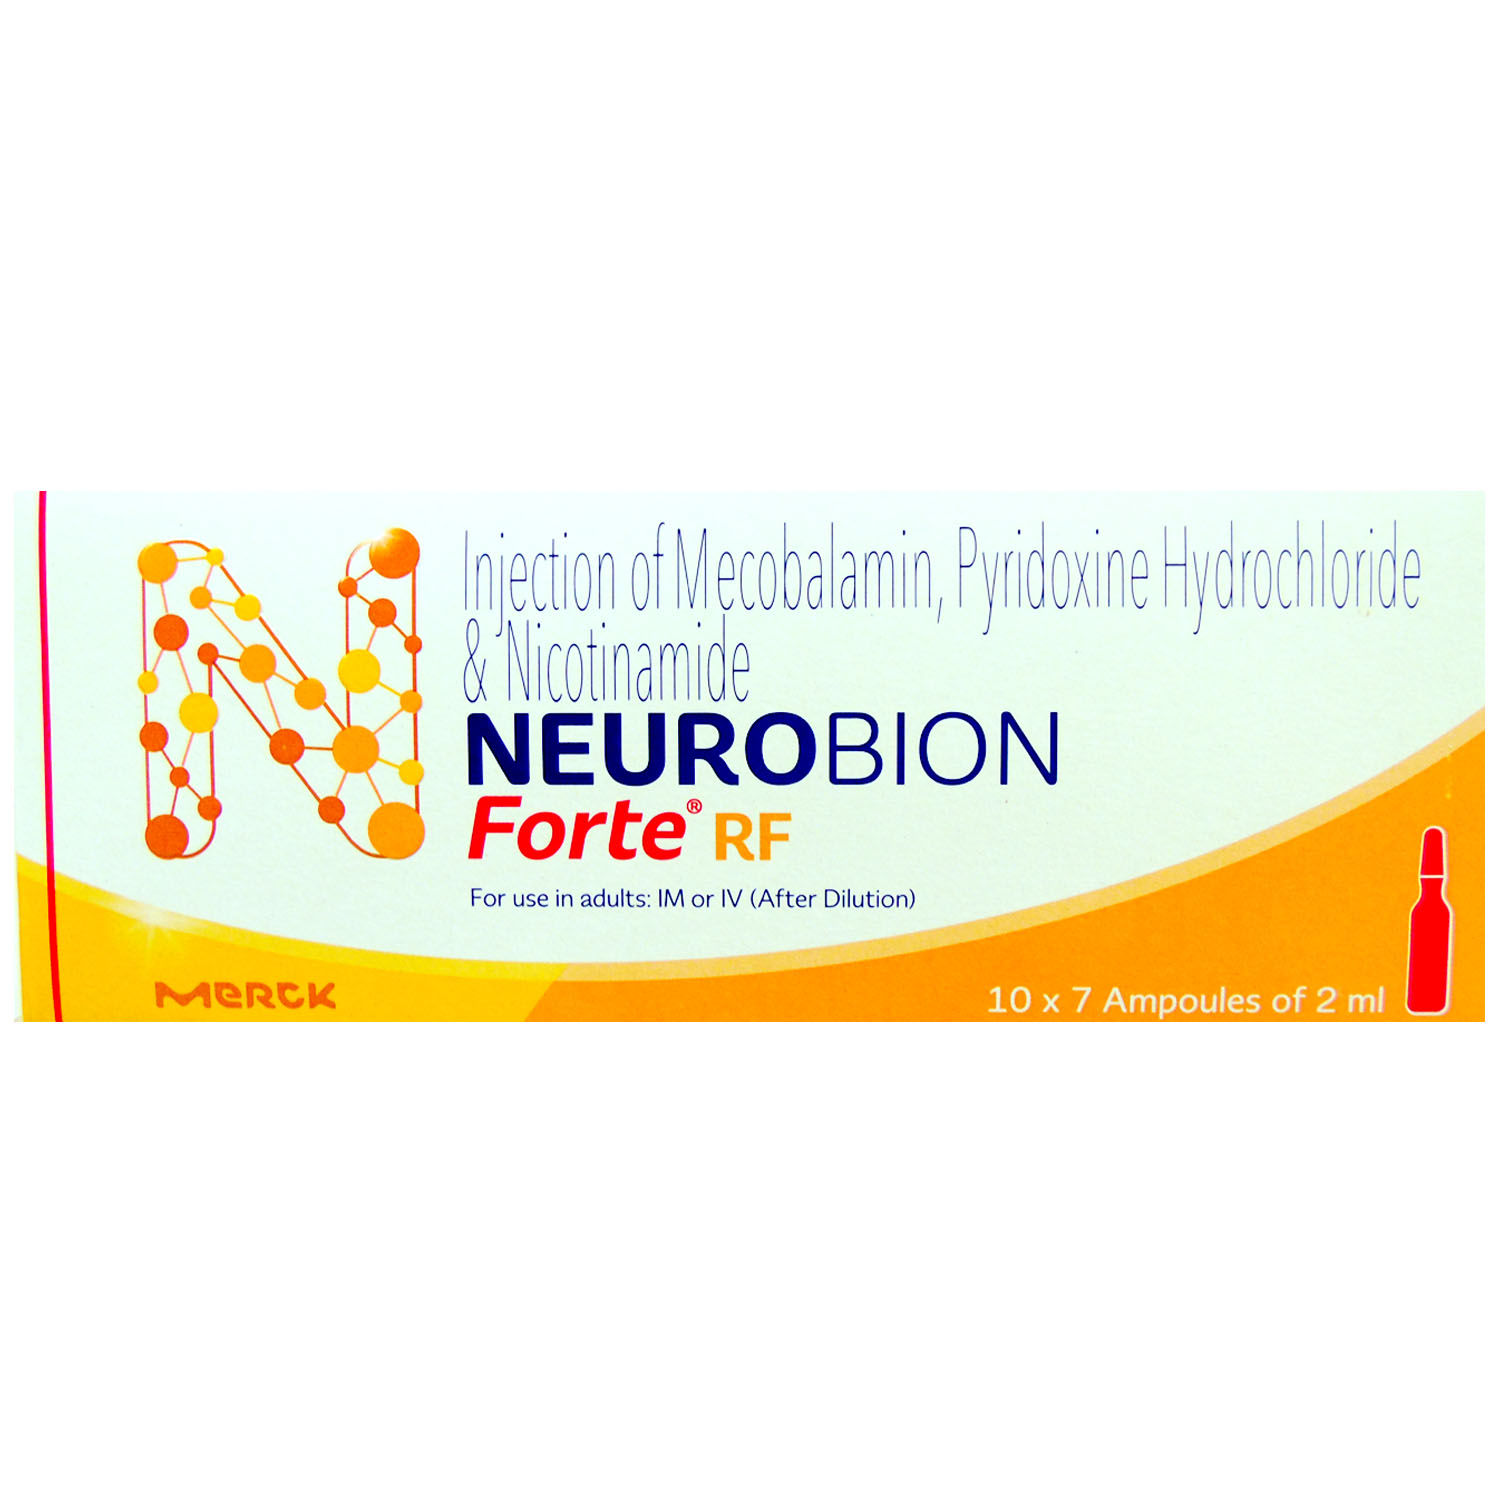 Neurobion Forte Injection 2 ml Price, Uses, Side Effects, Composition - Apo...